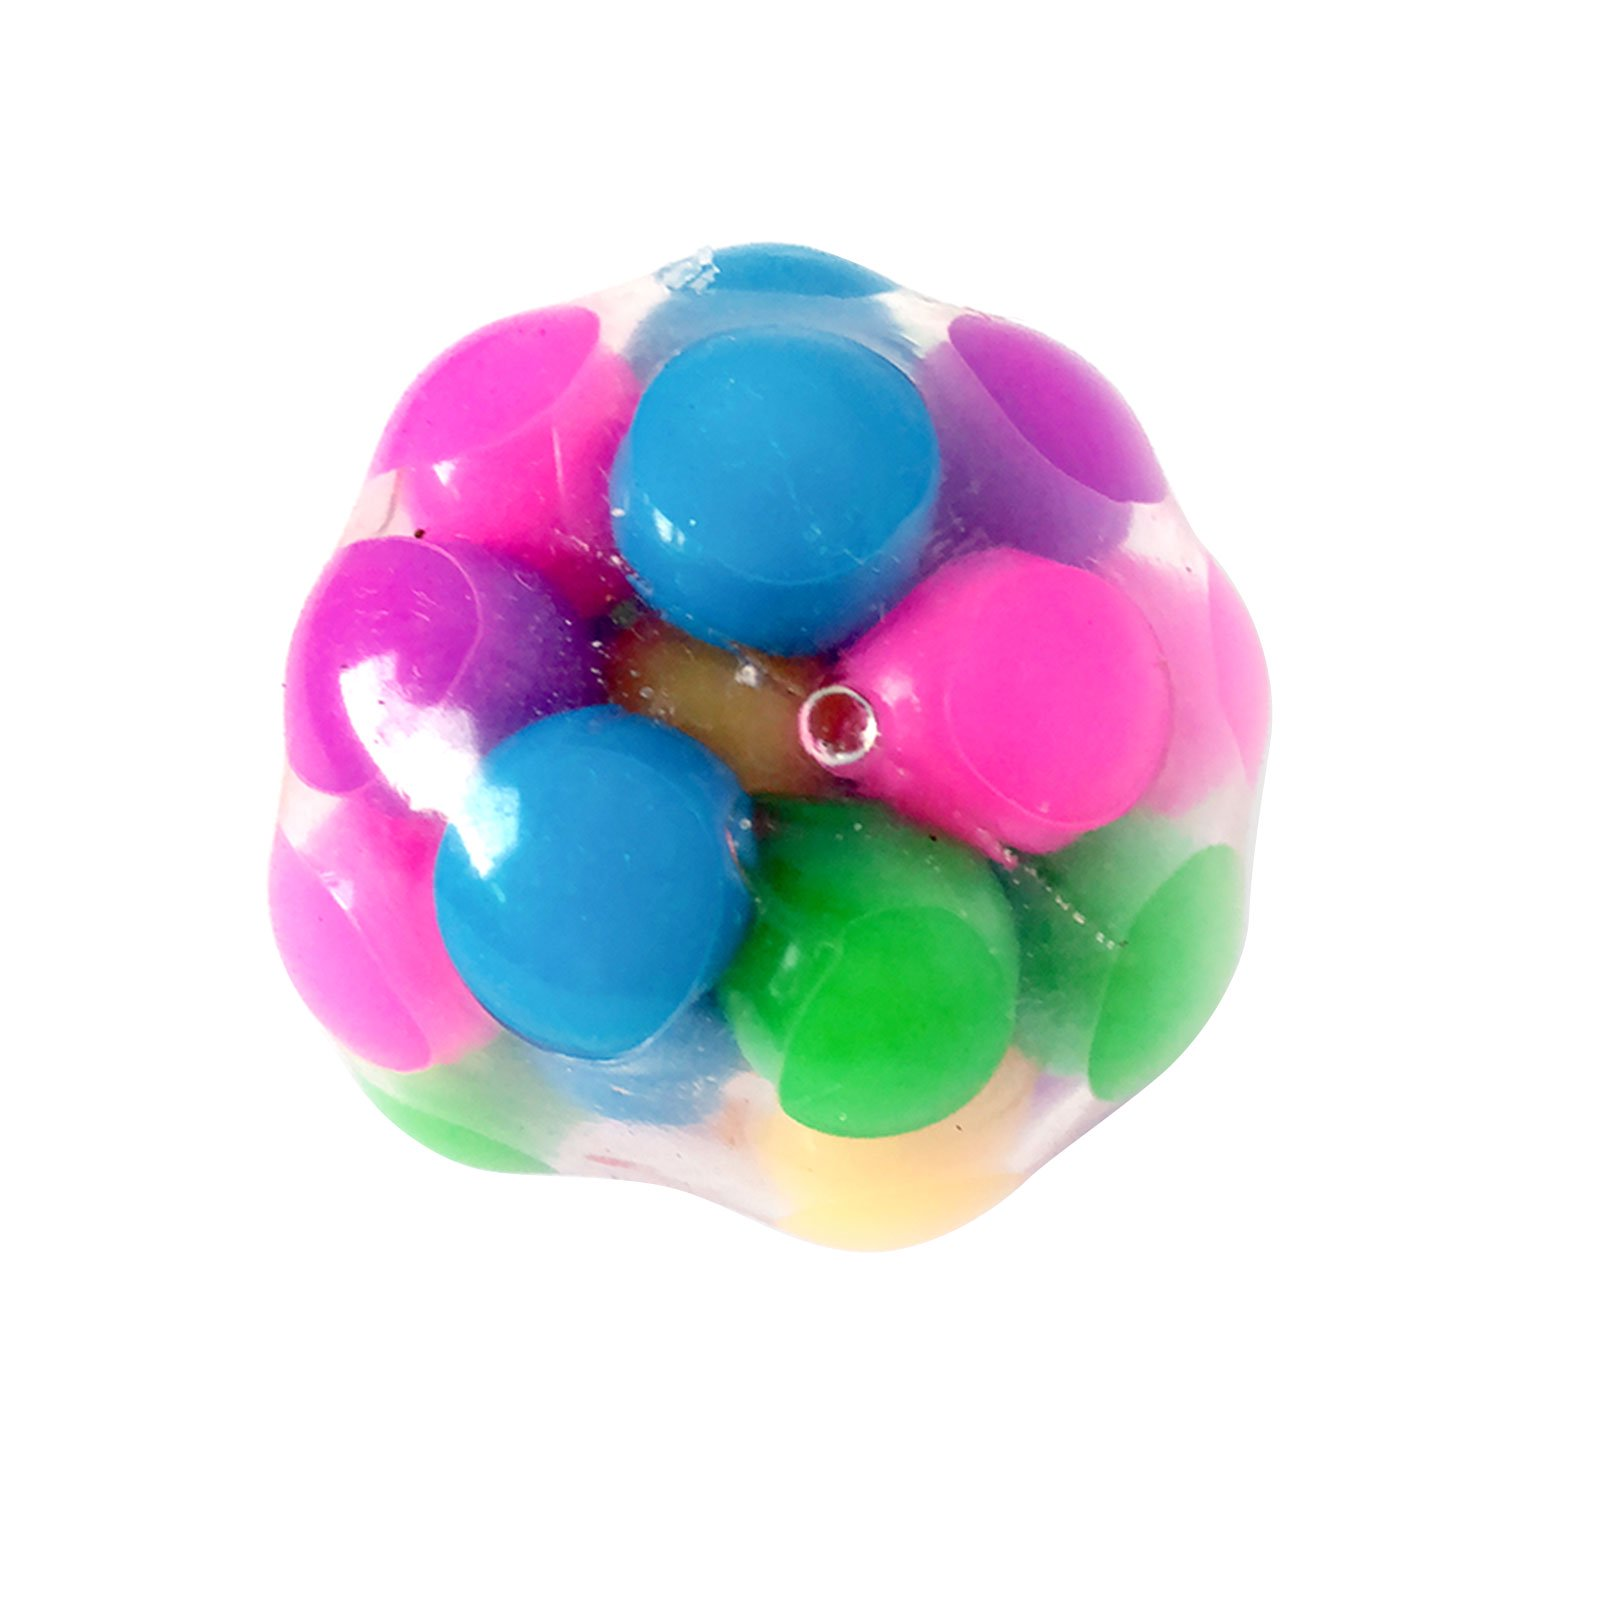 Animal Balloon Ball party favour Squeezy Sensory Fiddle Stress Autism ADHD 